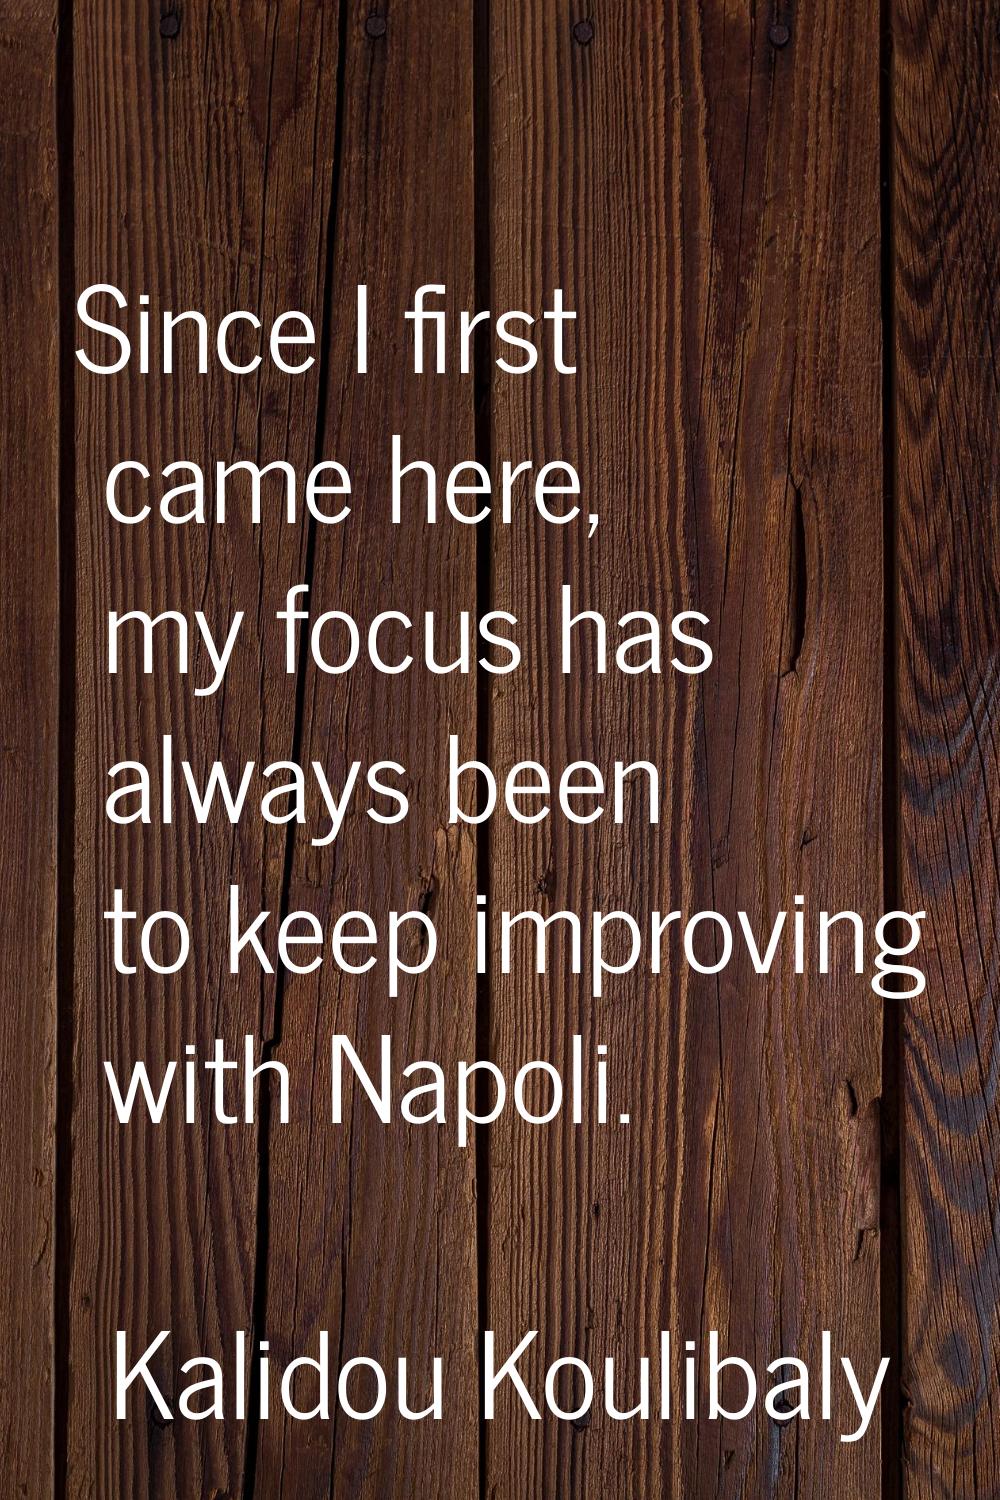 Since I first came here, my focus has always been to keep improving with Napoli.